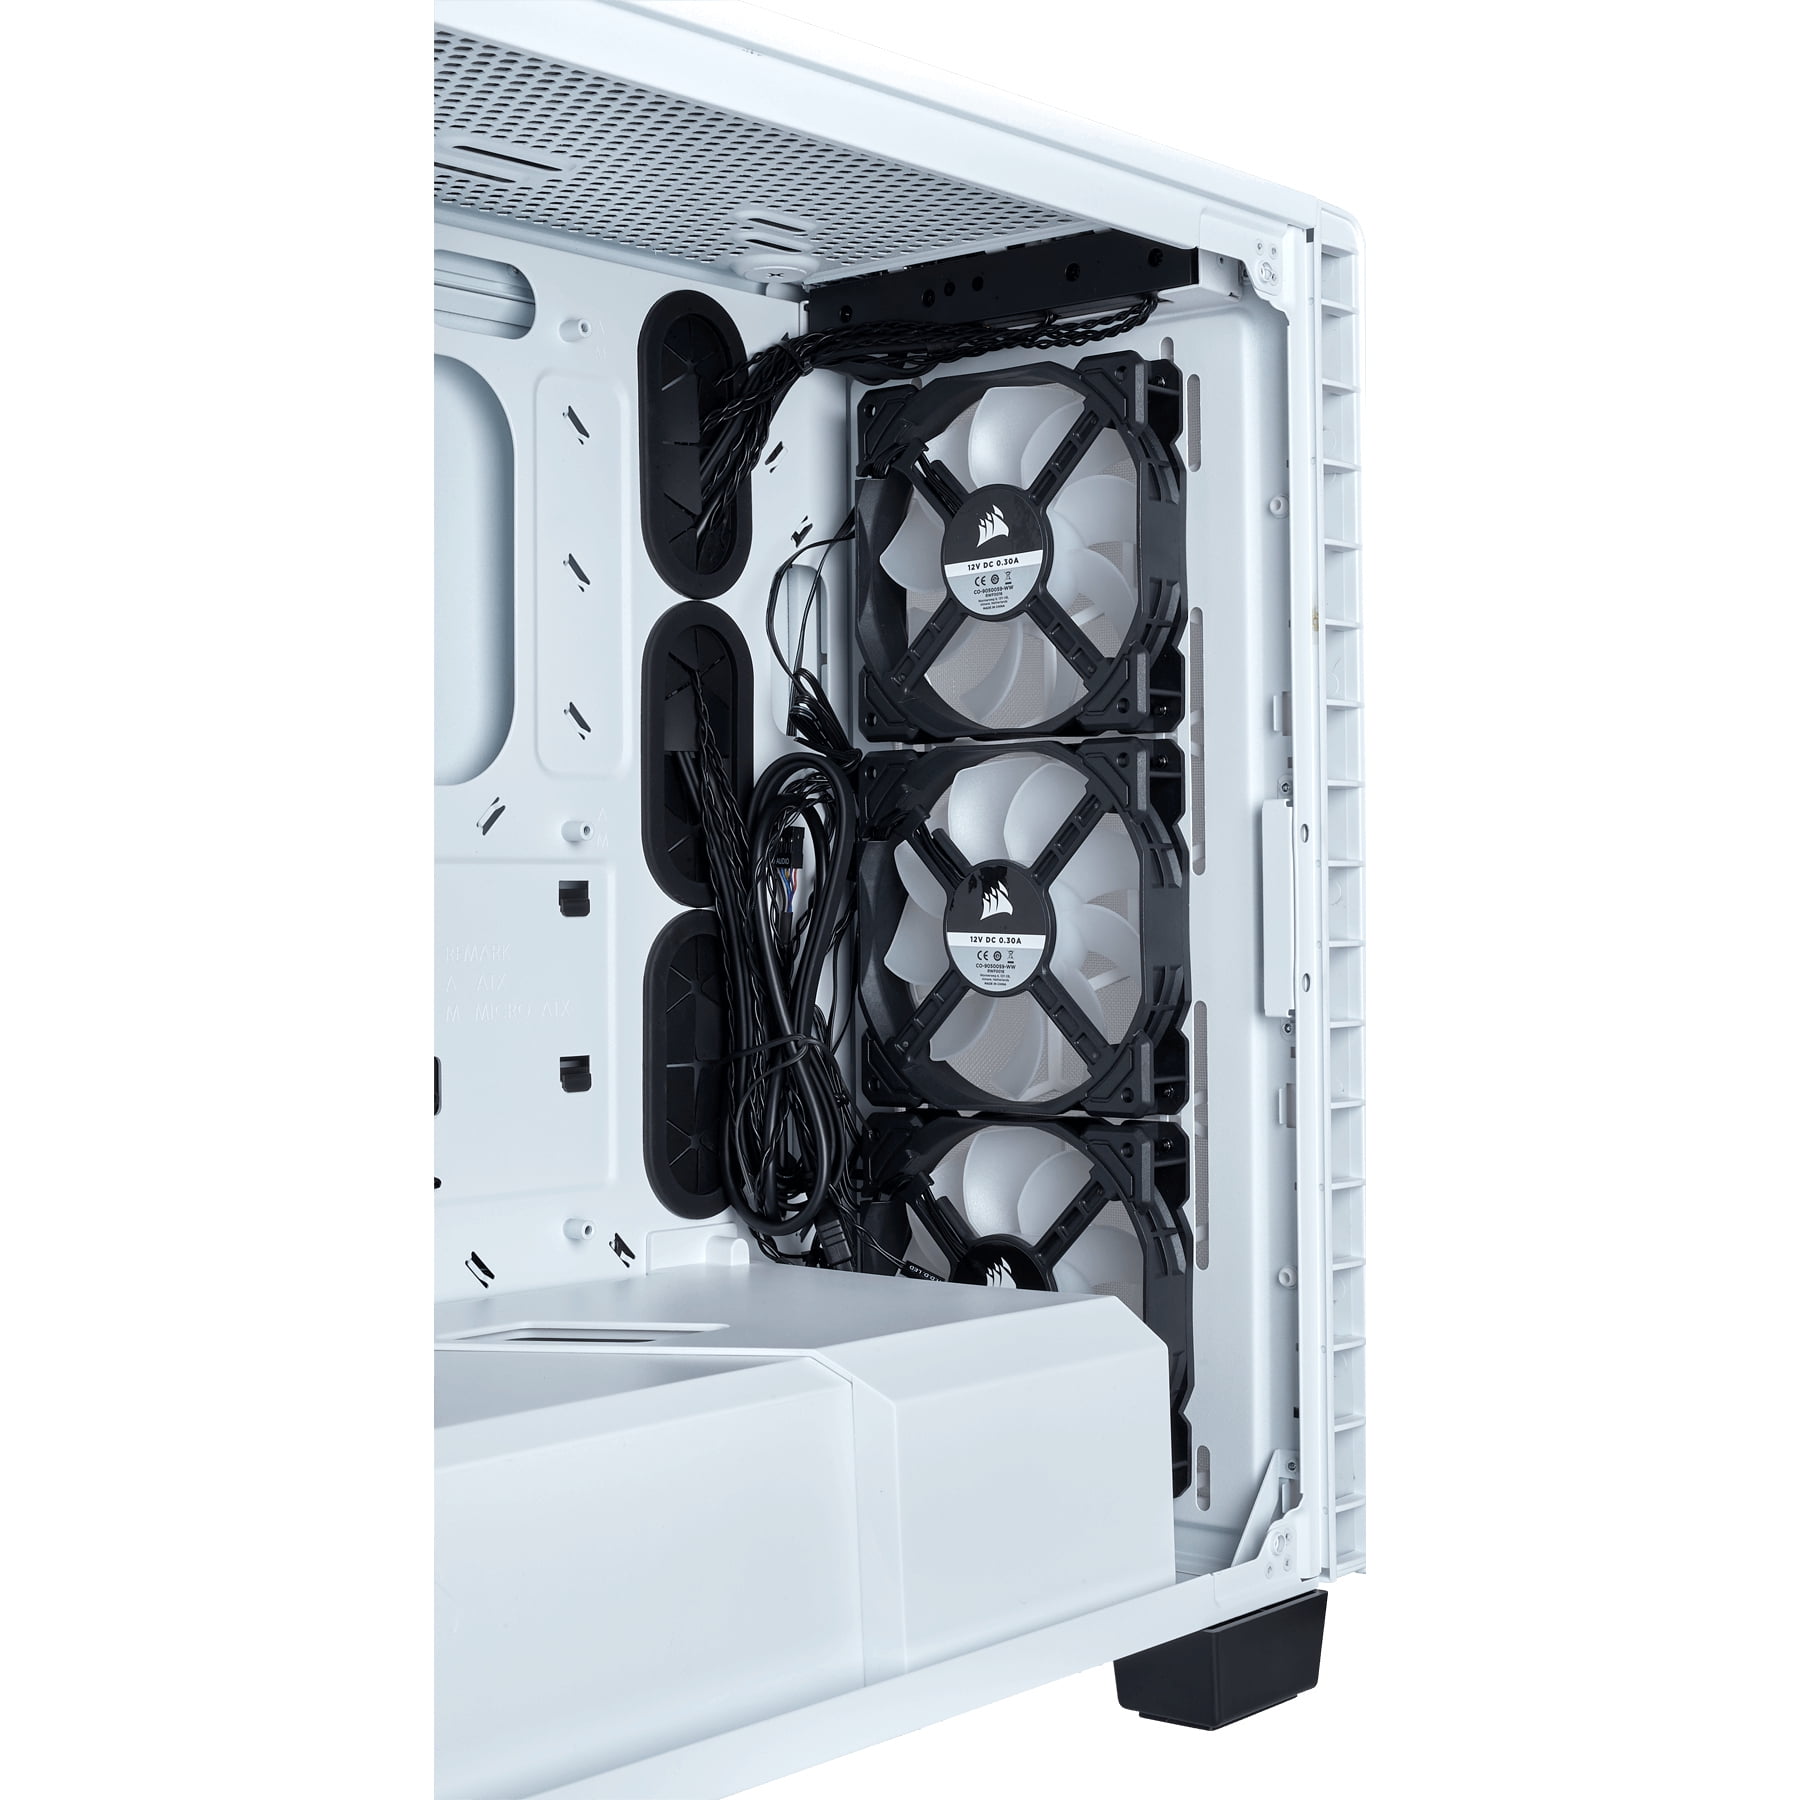 Crystal Series 460X RGB Compact ATX Case - White - Mid-tower - White - Steel, Tempered Glass - 5 x Bay - 3 x x Fan(s) Installed - -